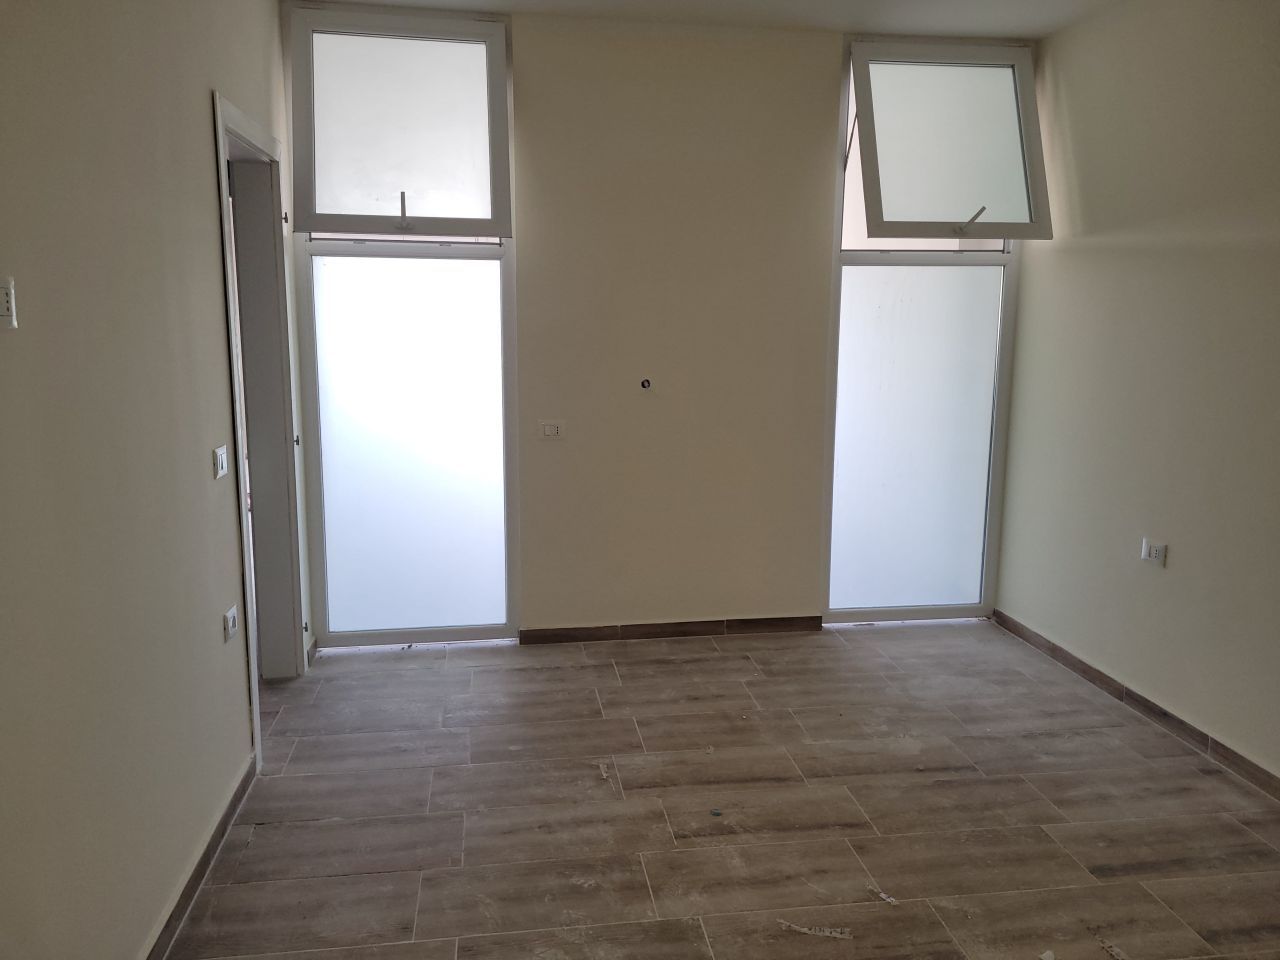 Property For Sale In Golem Durres. One Bedroom Apartment In Albania